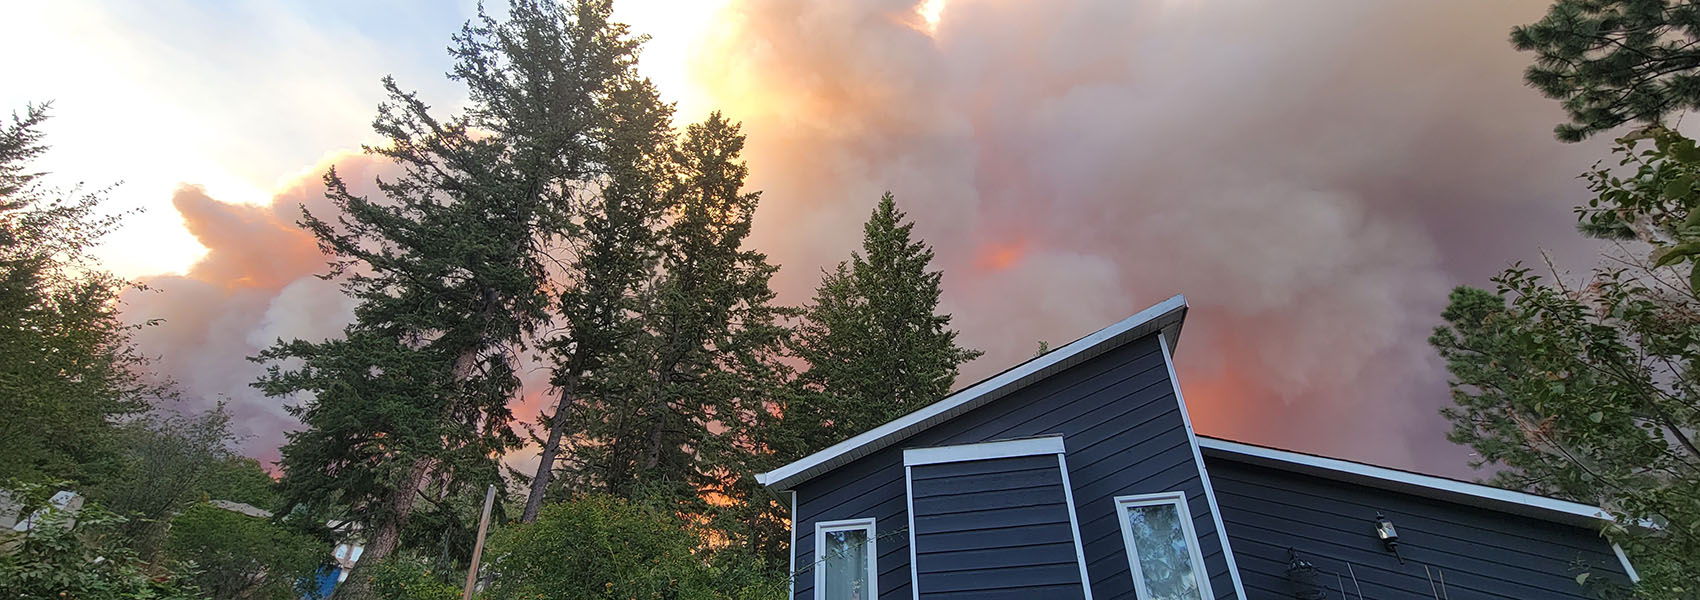 Smoky skies illuminated by wildfire appear over a home in the forest